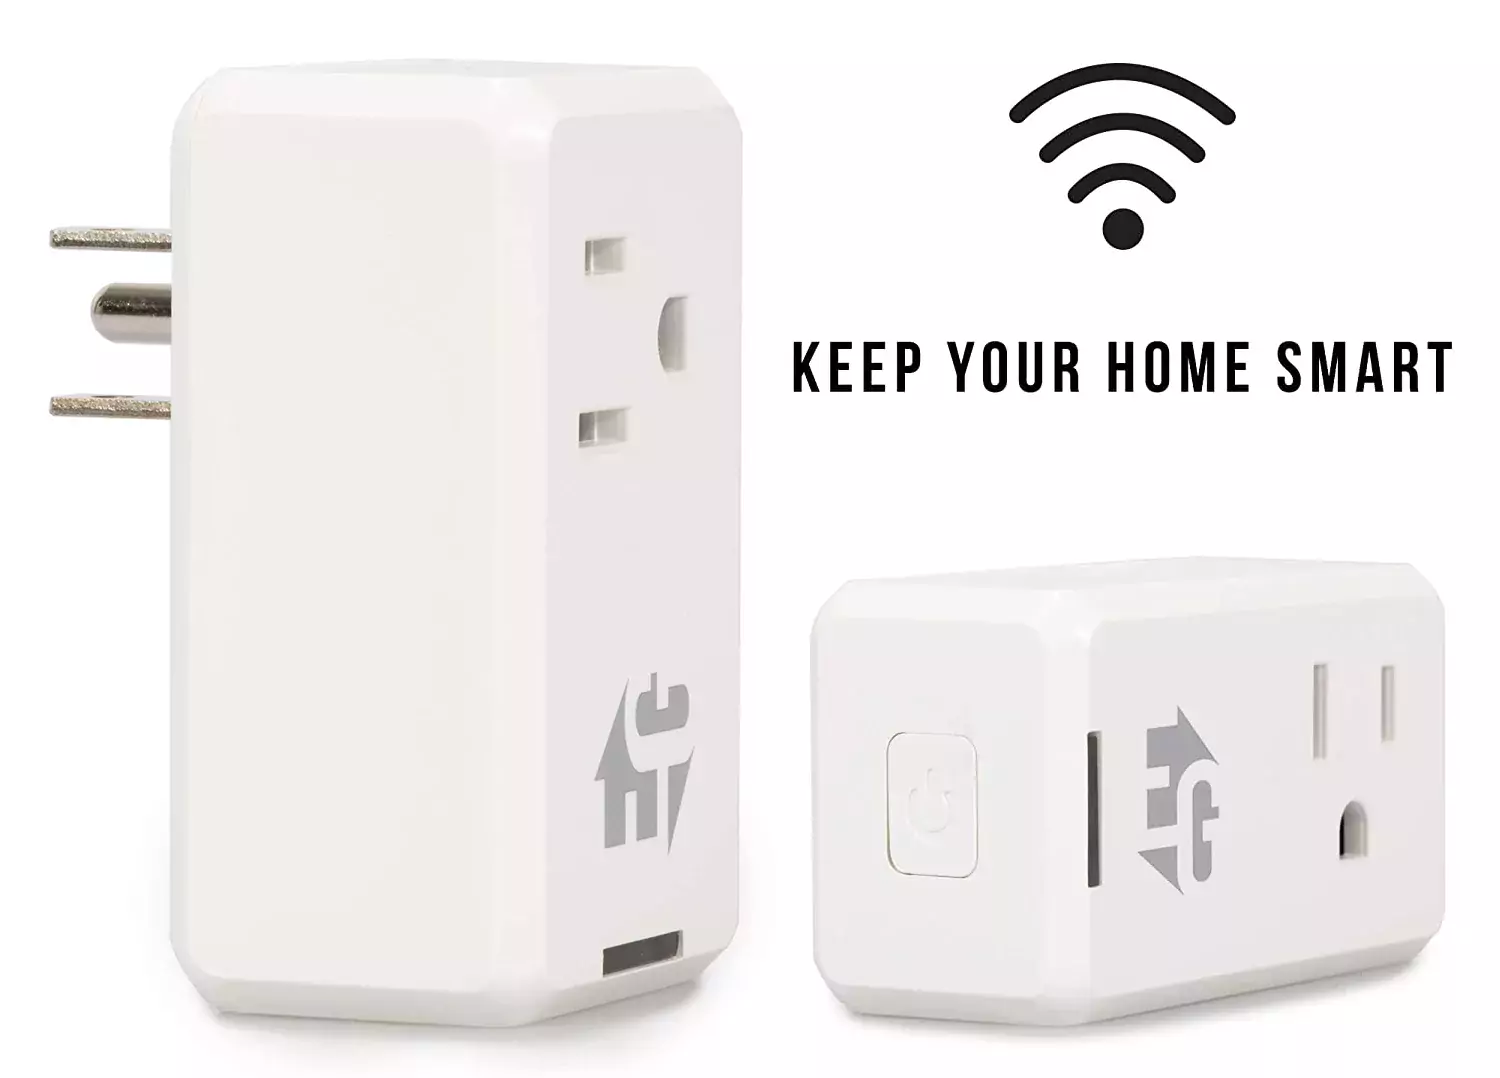 Gosund Mini smart plug work with Androids and IOS and is compatible with Google Assistant, Alexa